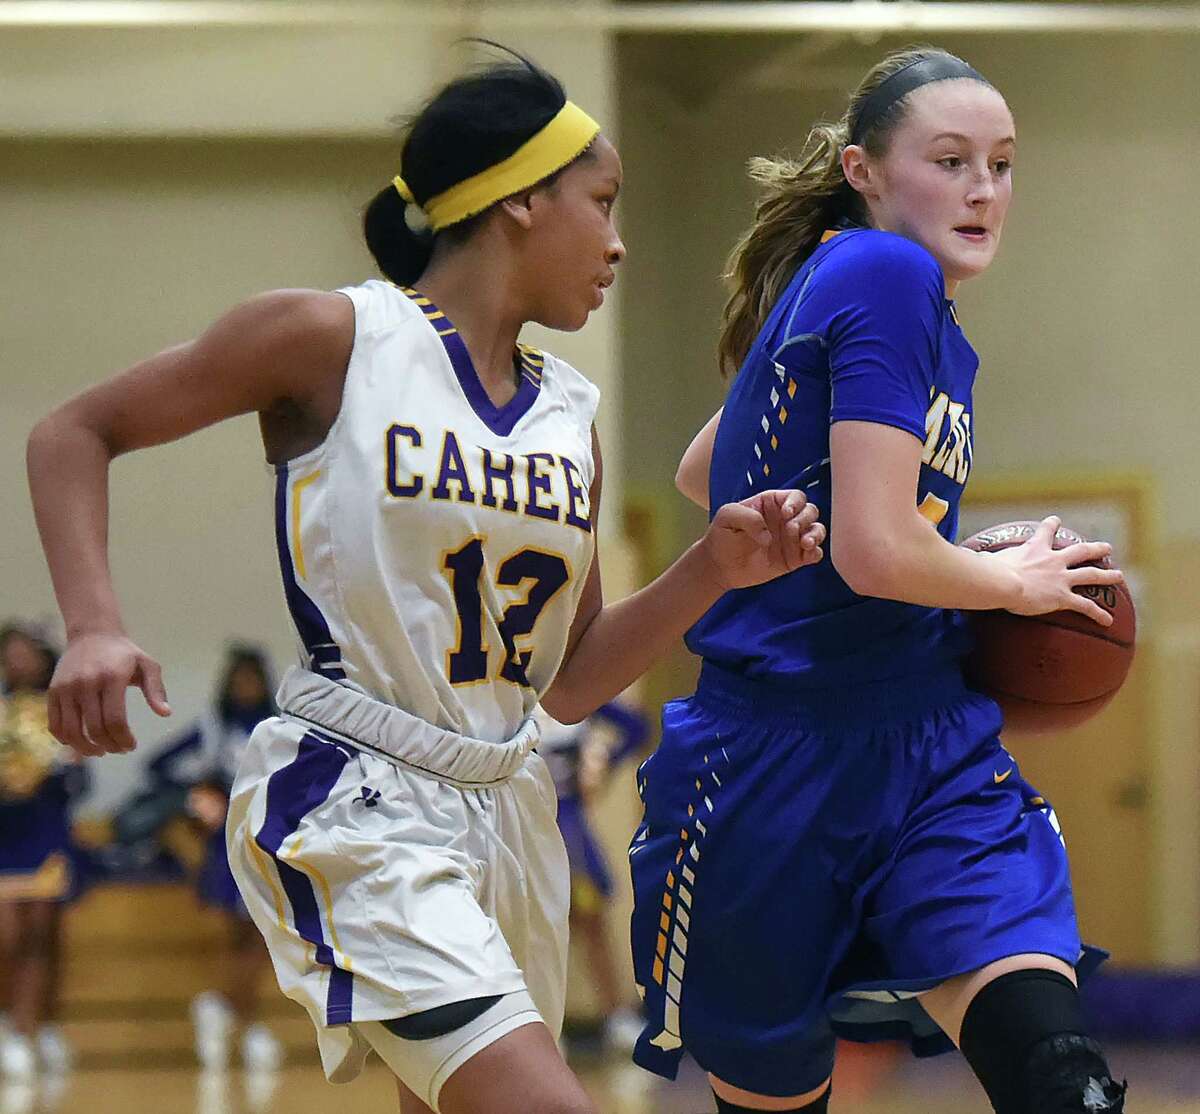 Mercy’s Bella Santoro looks to pass as Career’s Ciara Little defends in a 53-50 win for the Tigers Tuesday, February 7, 2017, at the gymnasium at Hill Regional Career High School in New Haven. (Catherine Avalone/New Haven Register)